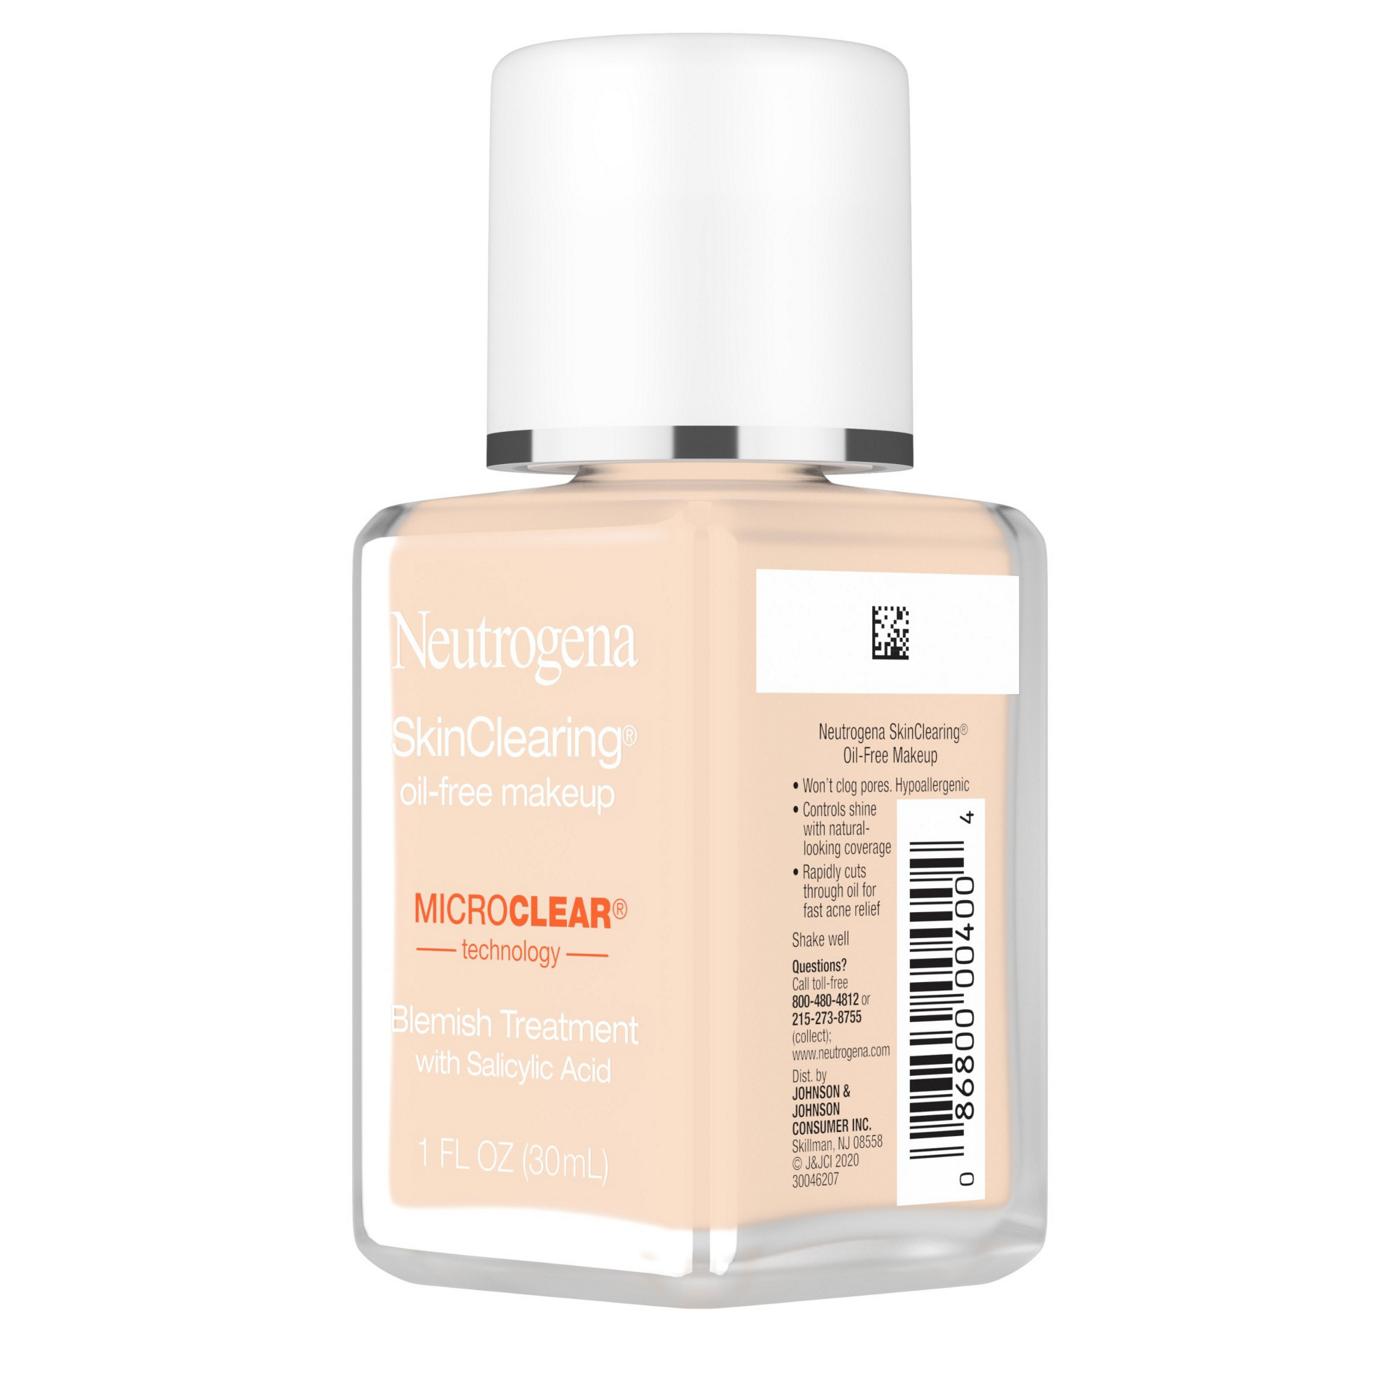 Neutrogena SkinClearing 10 Classic Ivory Oil-Free Makeup; image 8 of 8